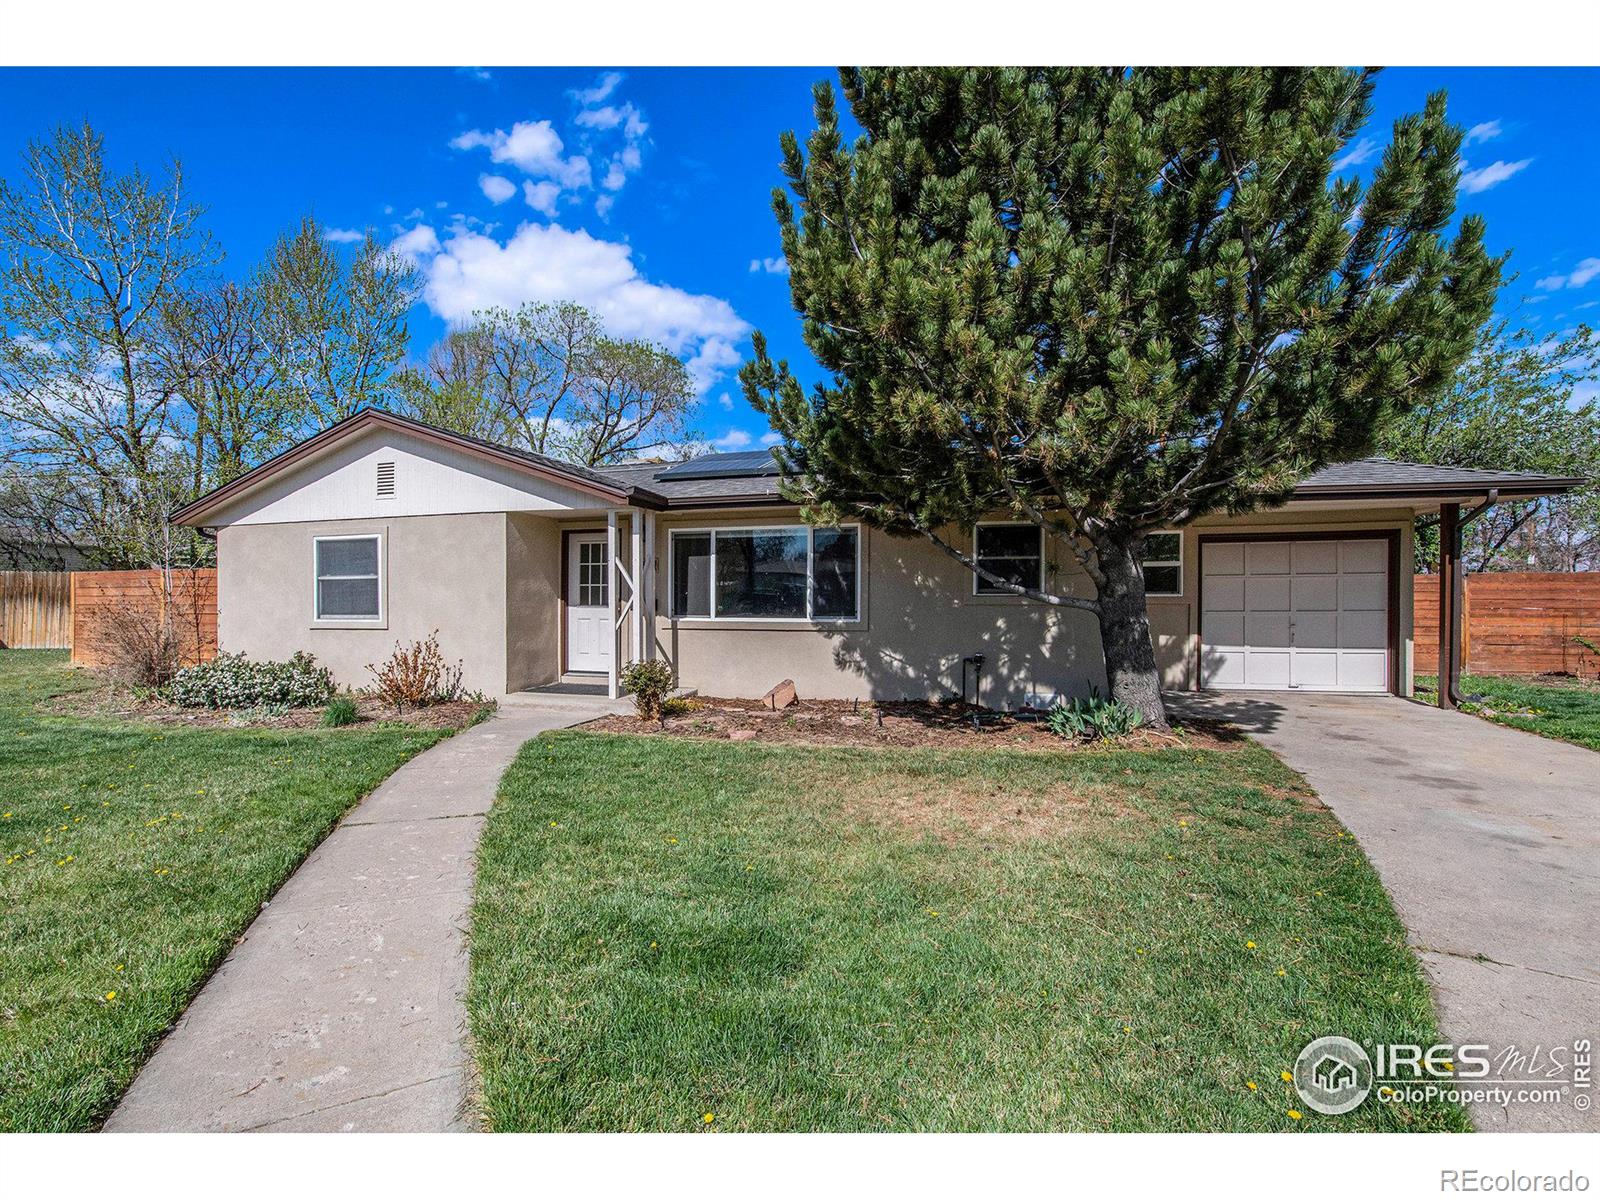 8065 w 46th circle, wheat ridge sold home. Closed on 2024-05-15 for $652,000.